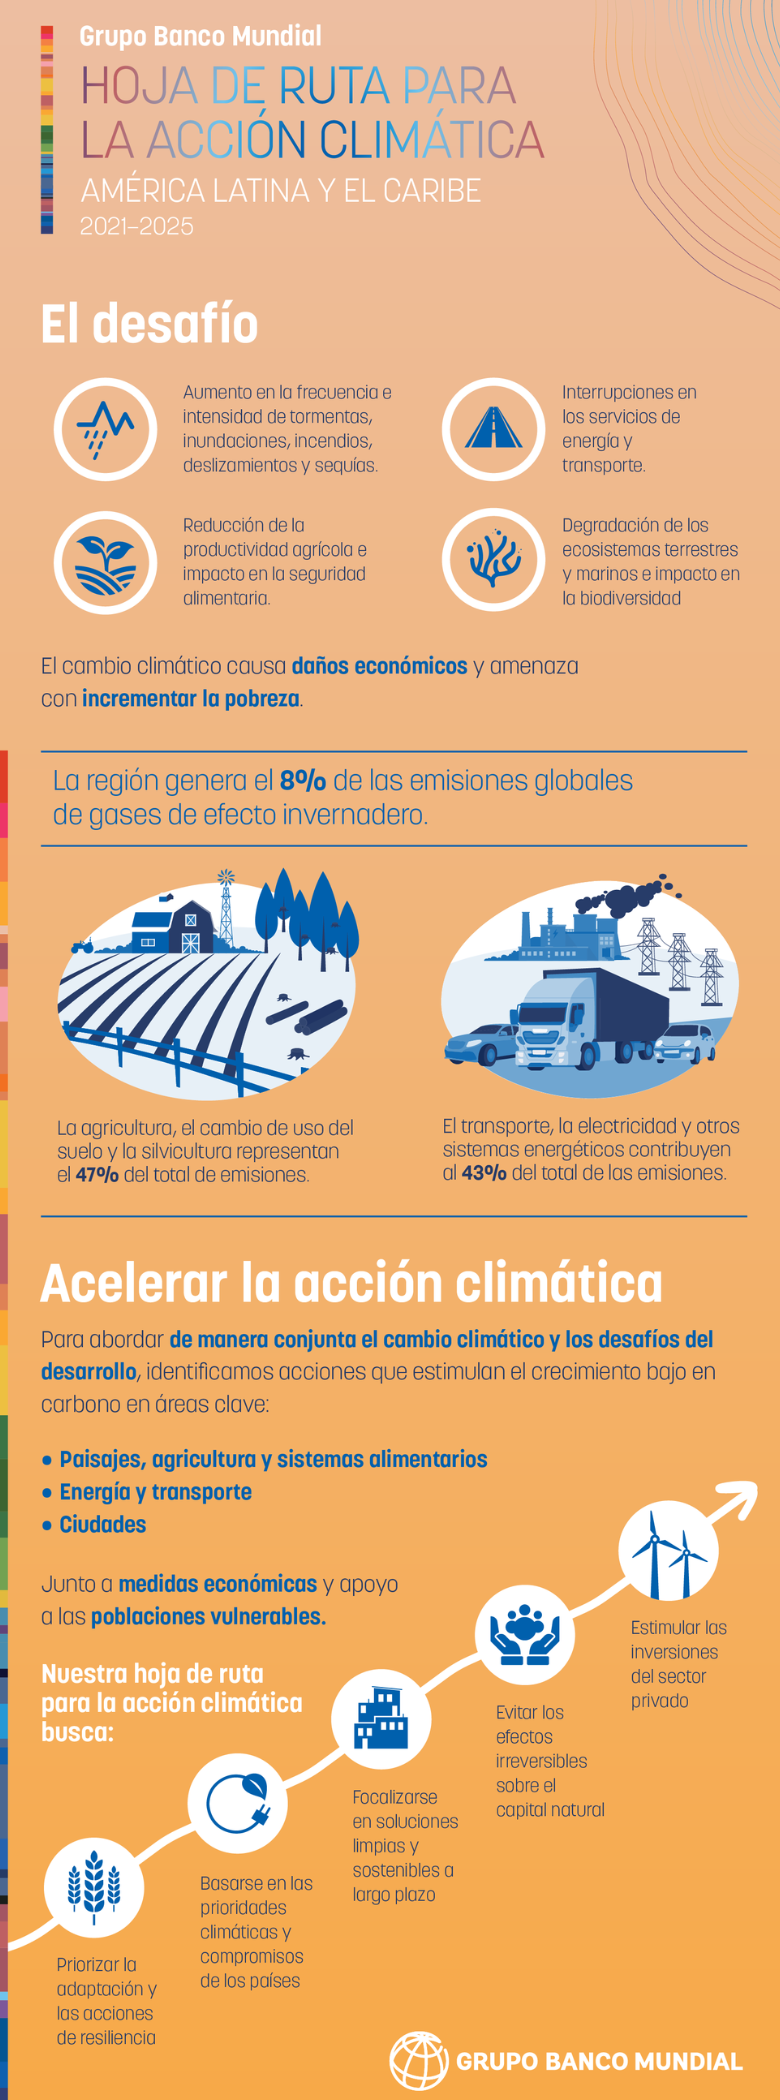 Infographic - climate action in LAC